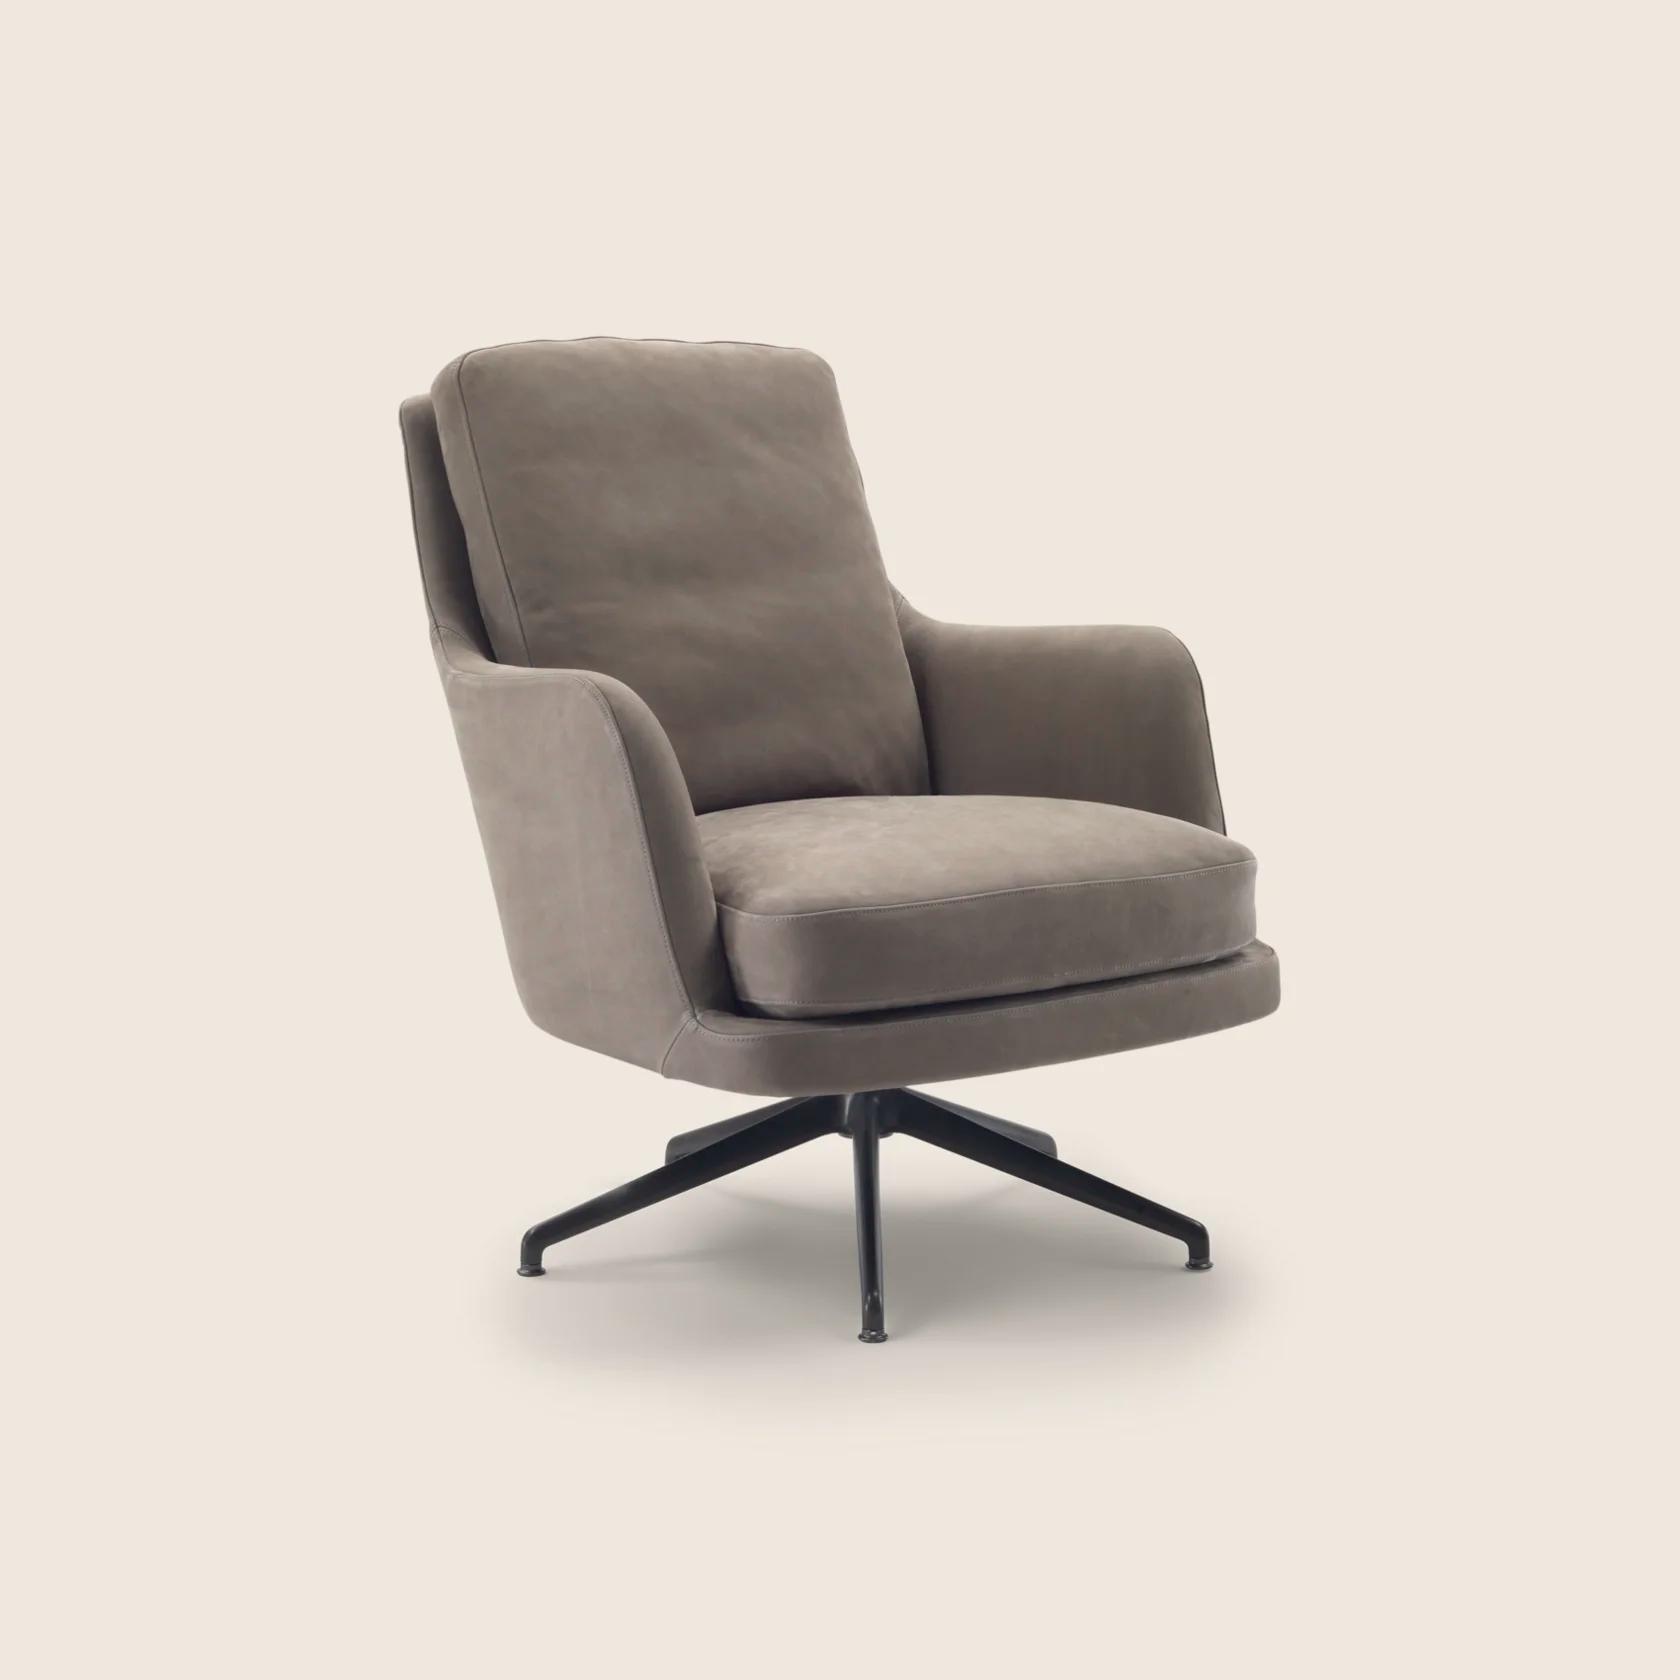 028623_MARLEY_ARMCHAIR_01.png